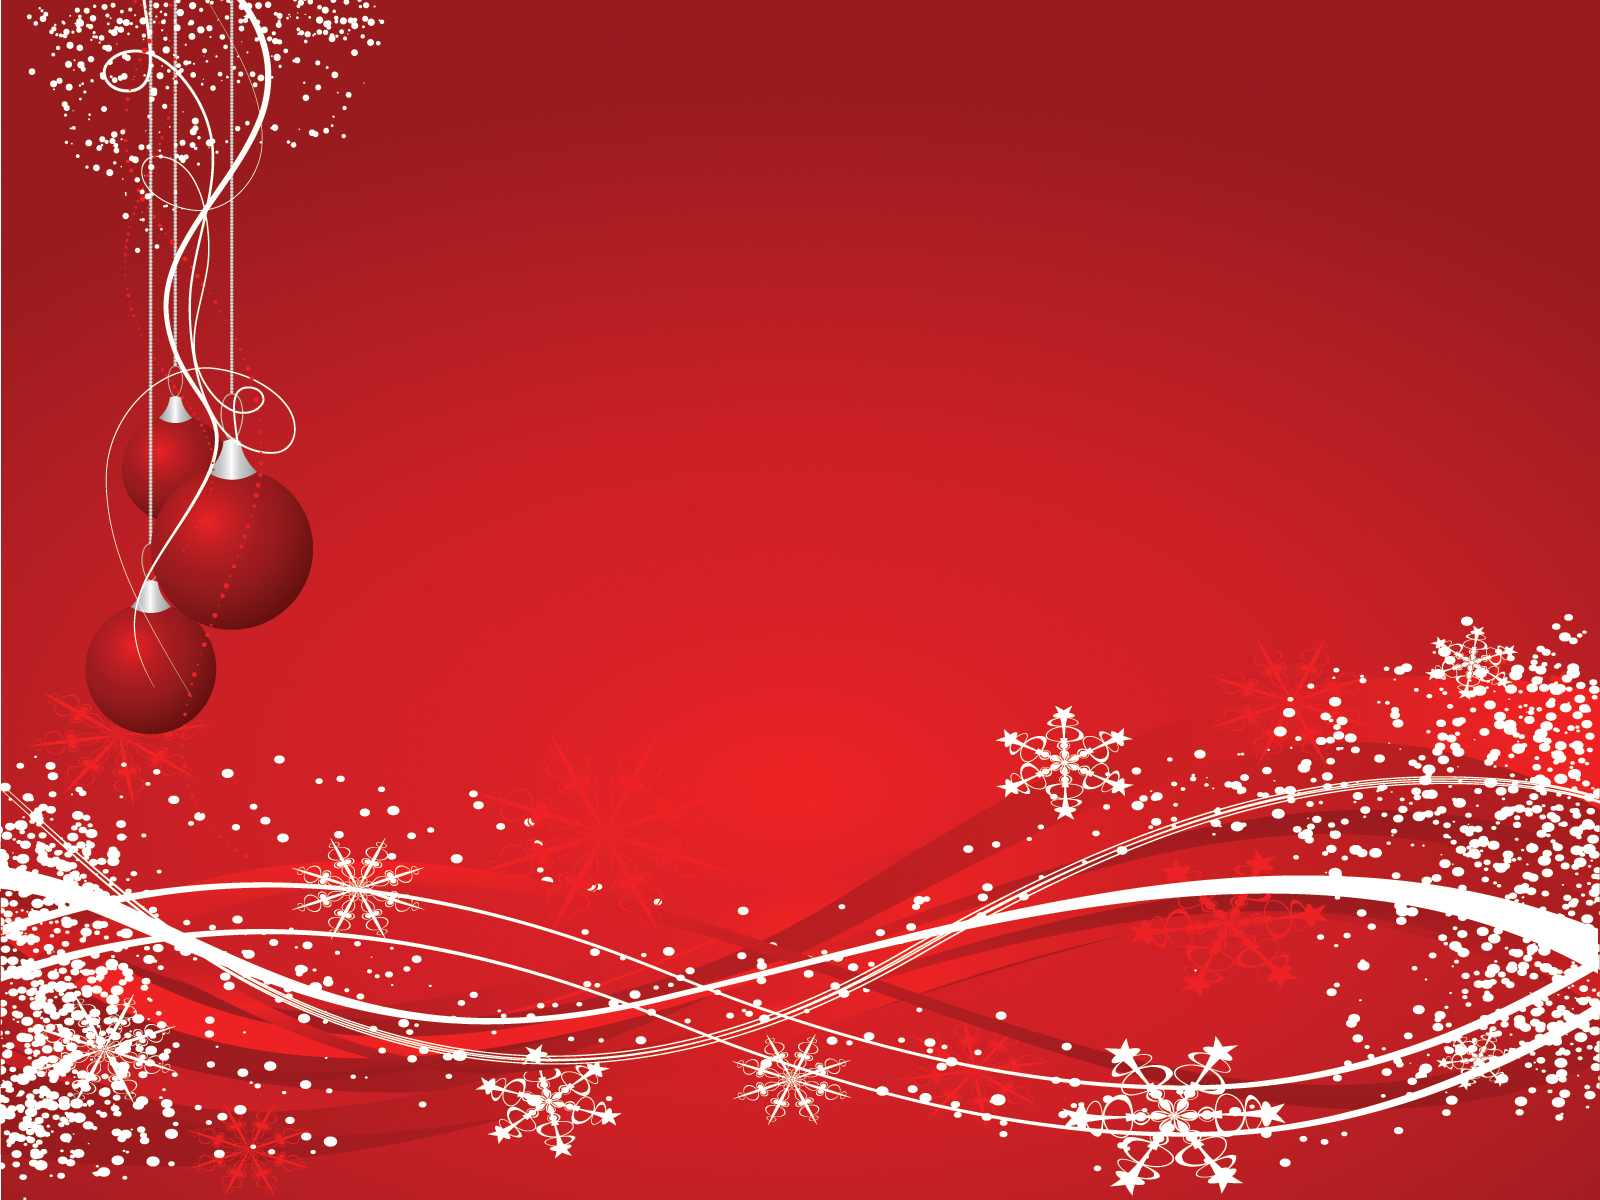 Free Download Christmas Powerpoint Templates Free PPT Backgrounds And Templates 1600x1200 For